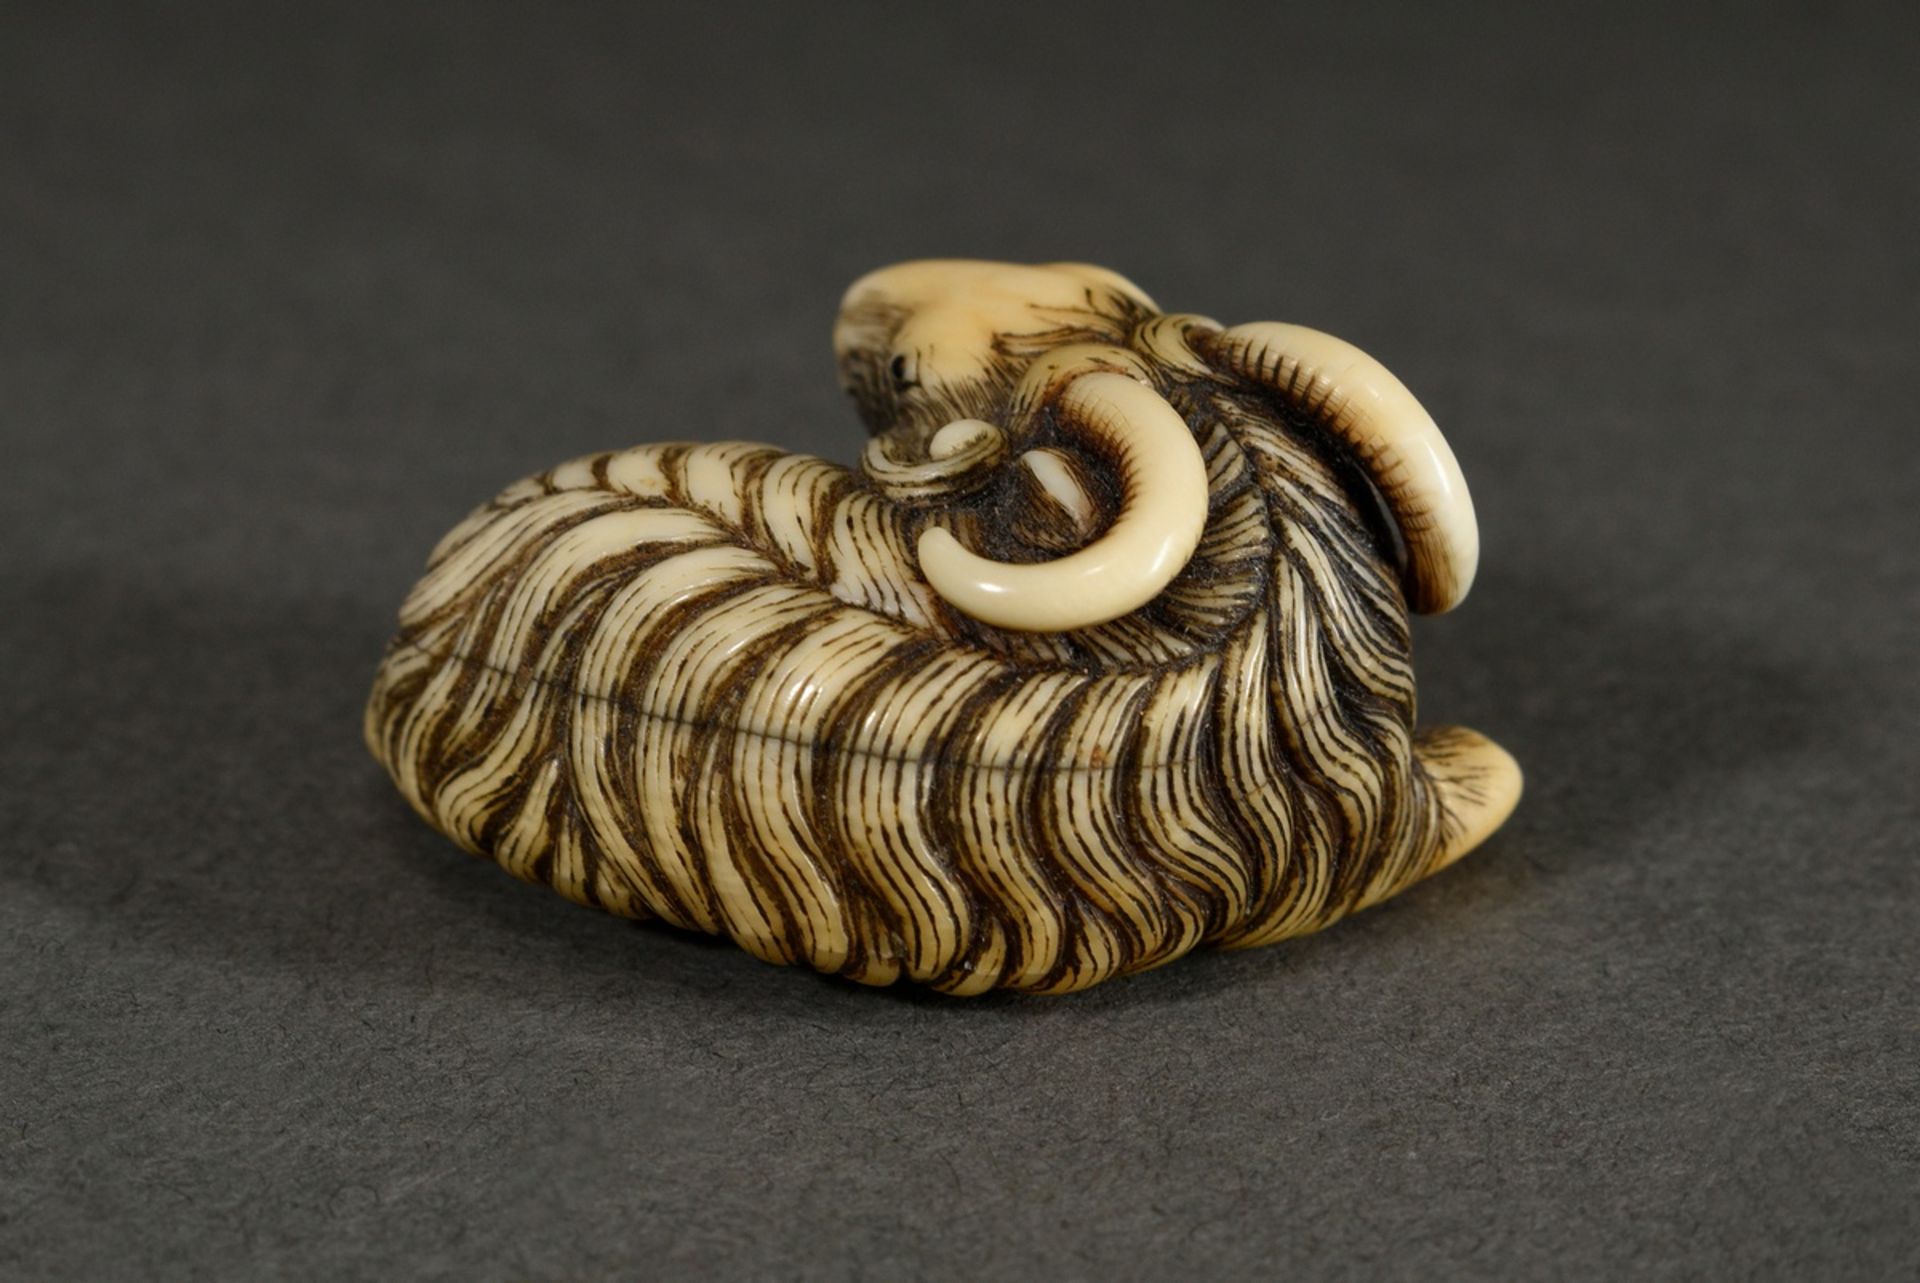 Ivory netsuke "Rolled-in mountain goat" with inlaid eyes of black horn and engraved fur, golden pat - Image 2 of 6